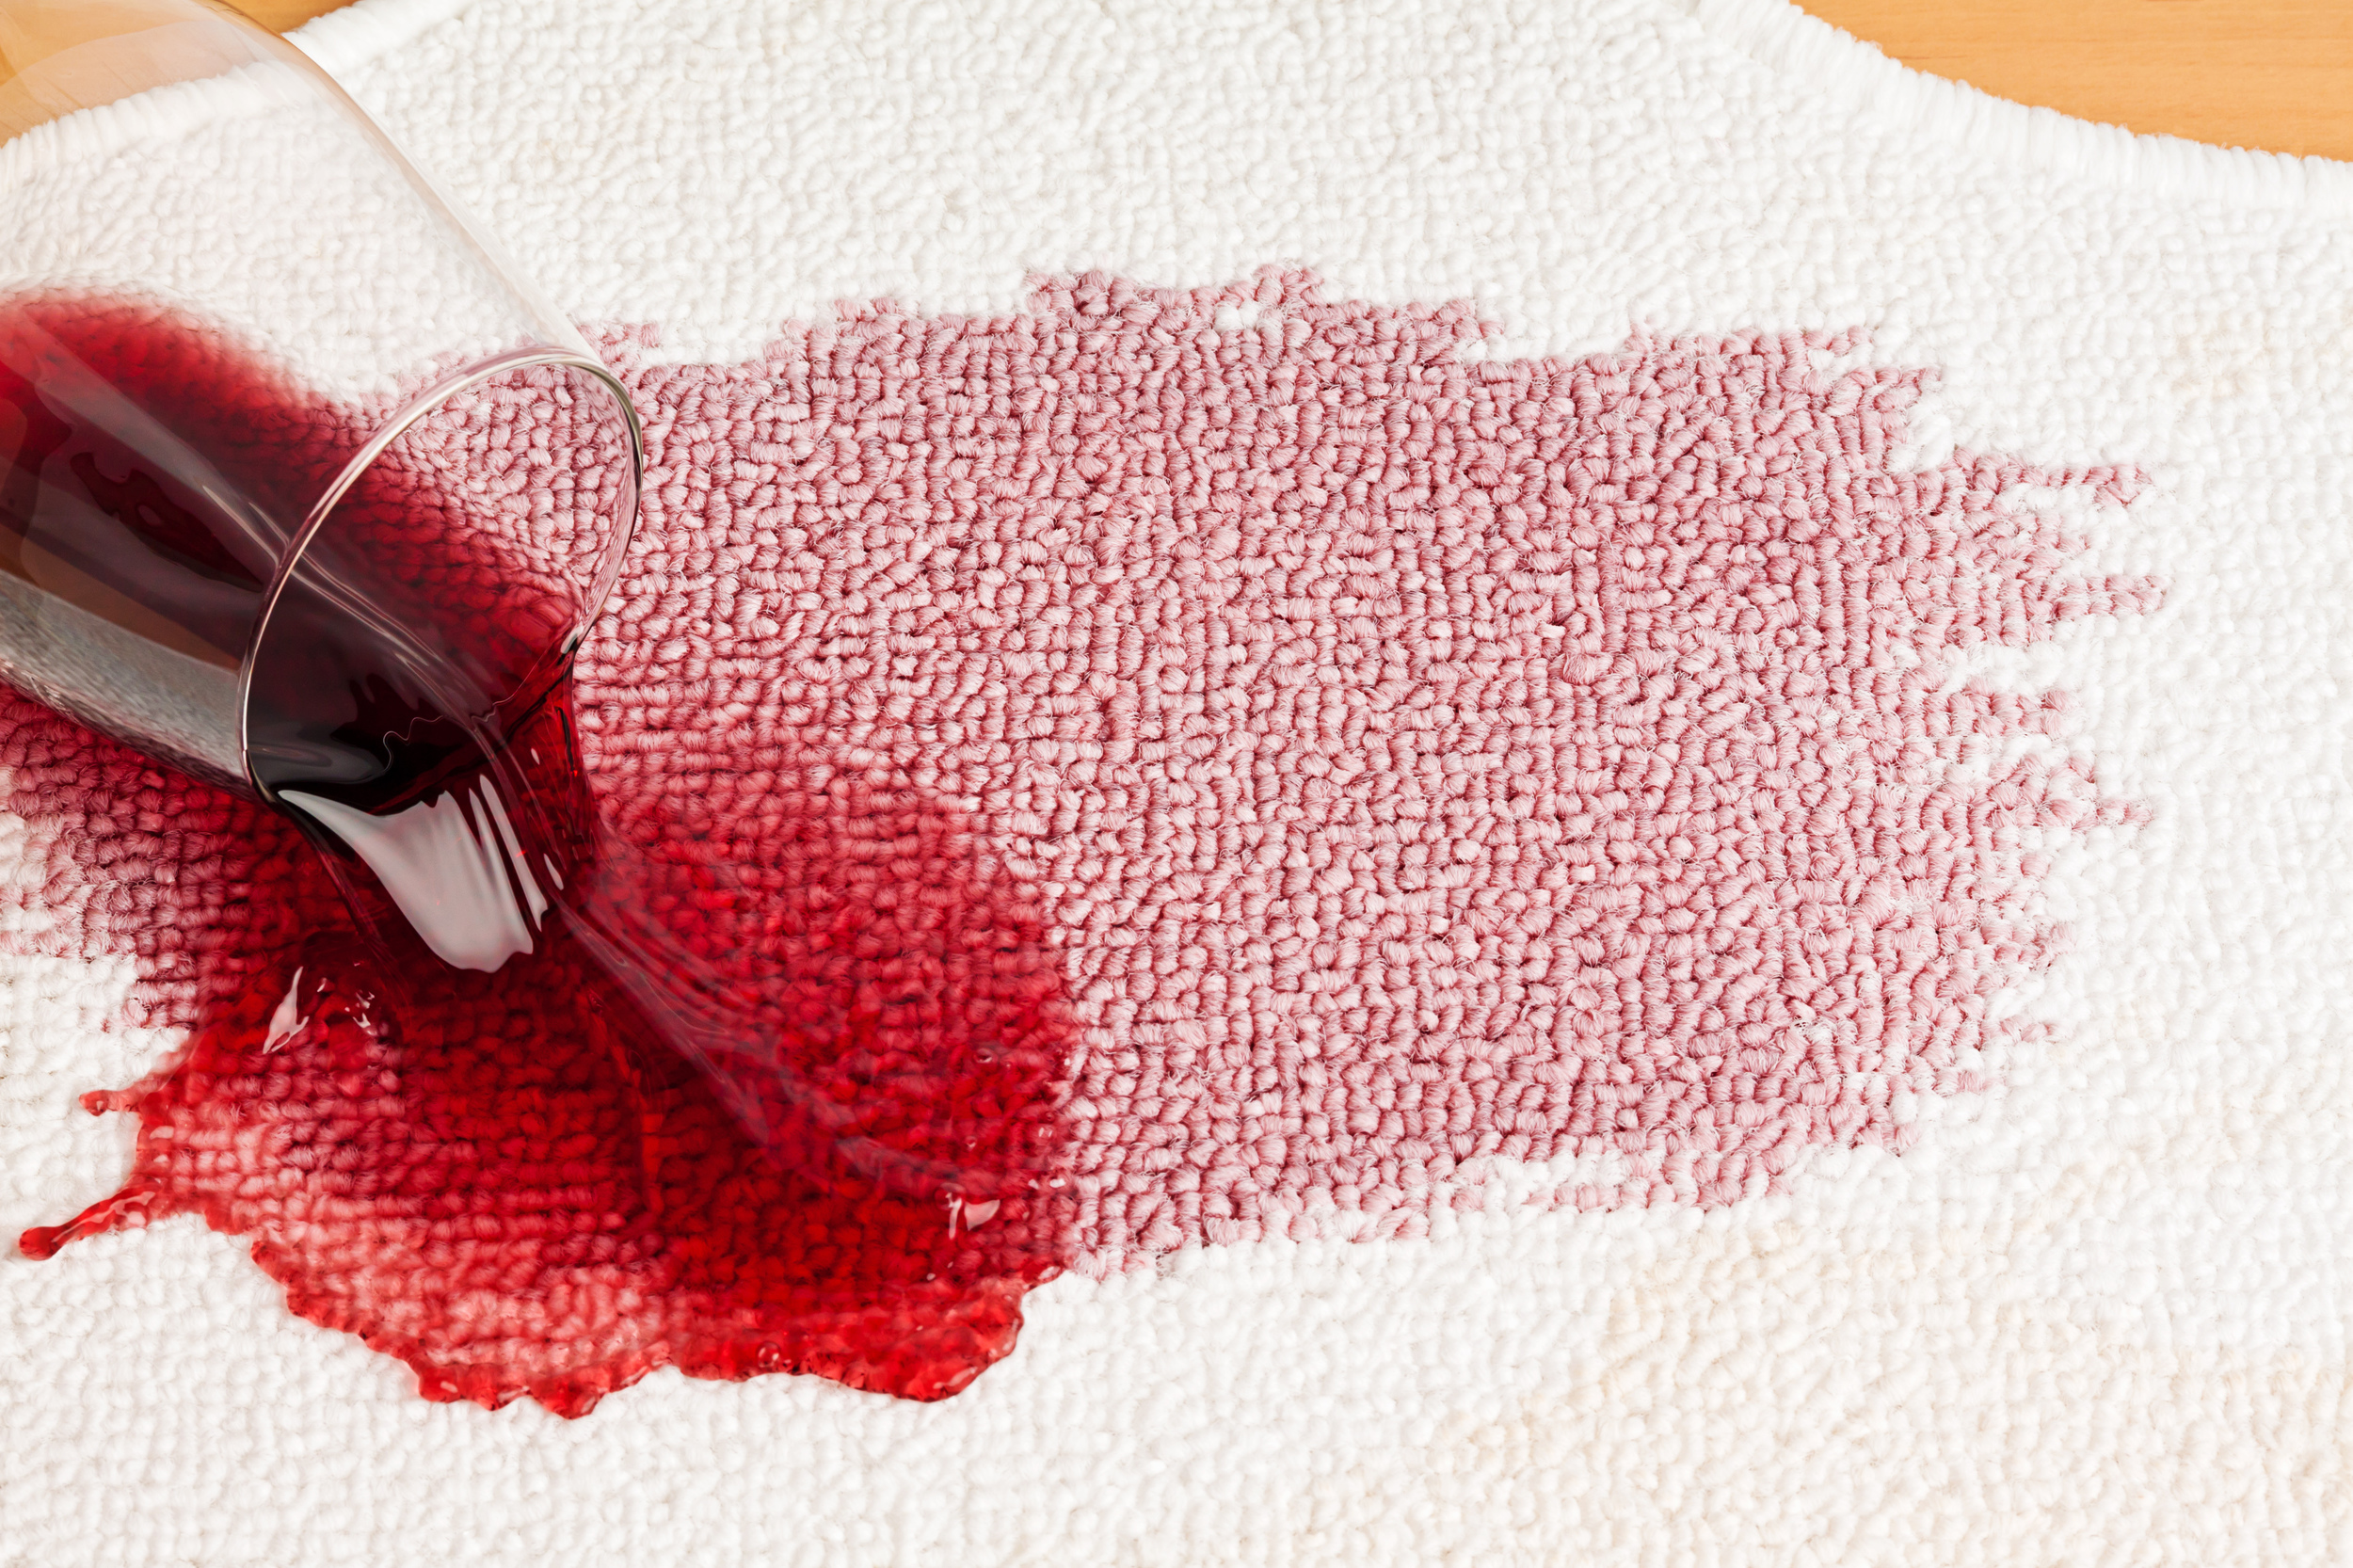 red-wine-is-spilled-on-a-carpet-reverse-glass-and-all-relate-1